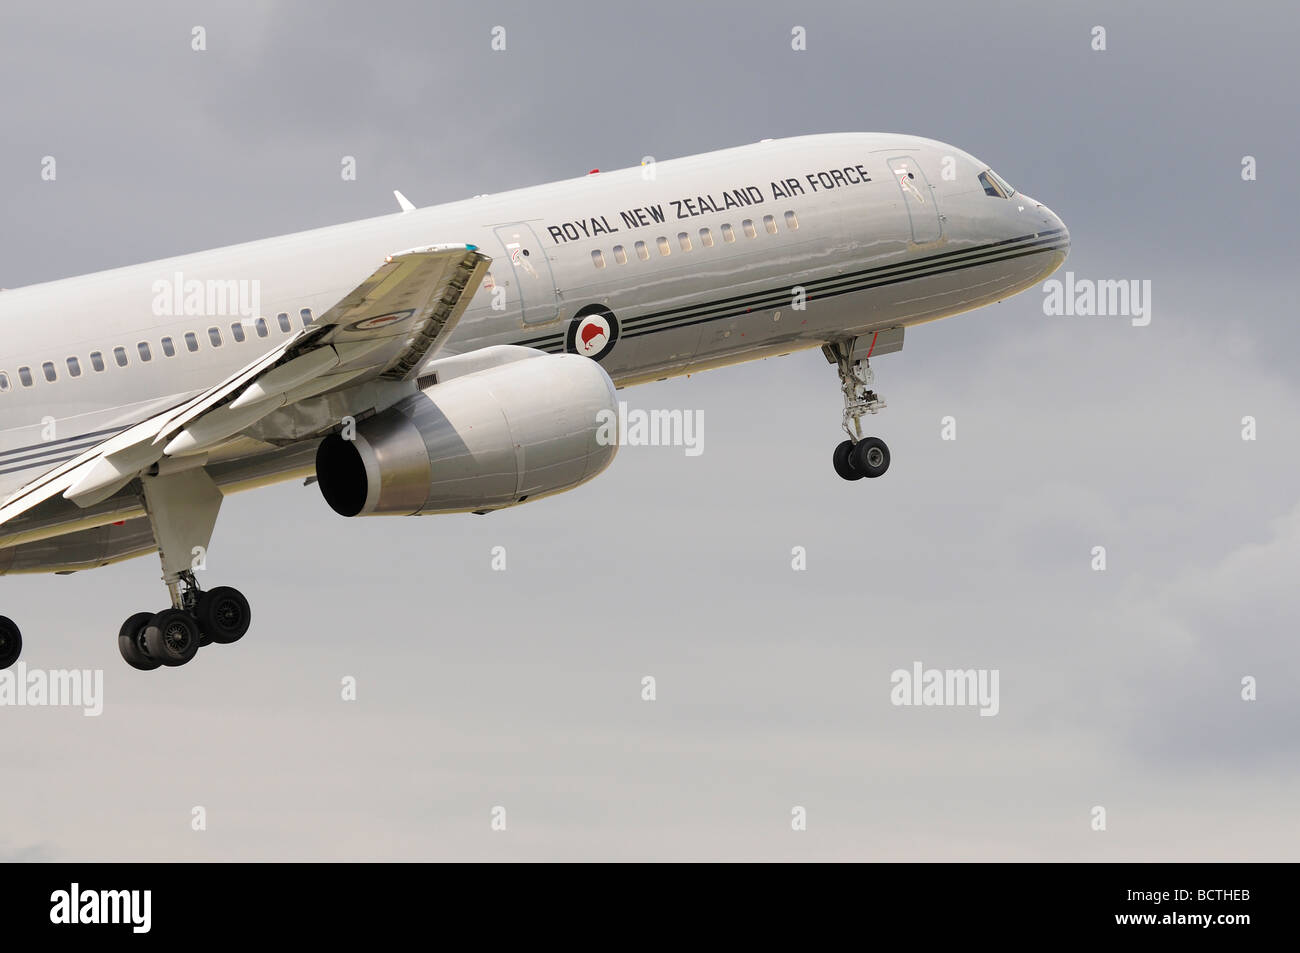 A very clean and shiny Royal New Zealand Air Force Boeing 757 Airliner from 40 Squadron takes off at the 2009 RIAT Stock Photo